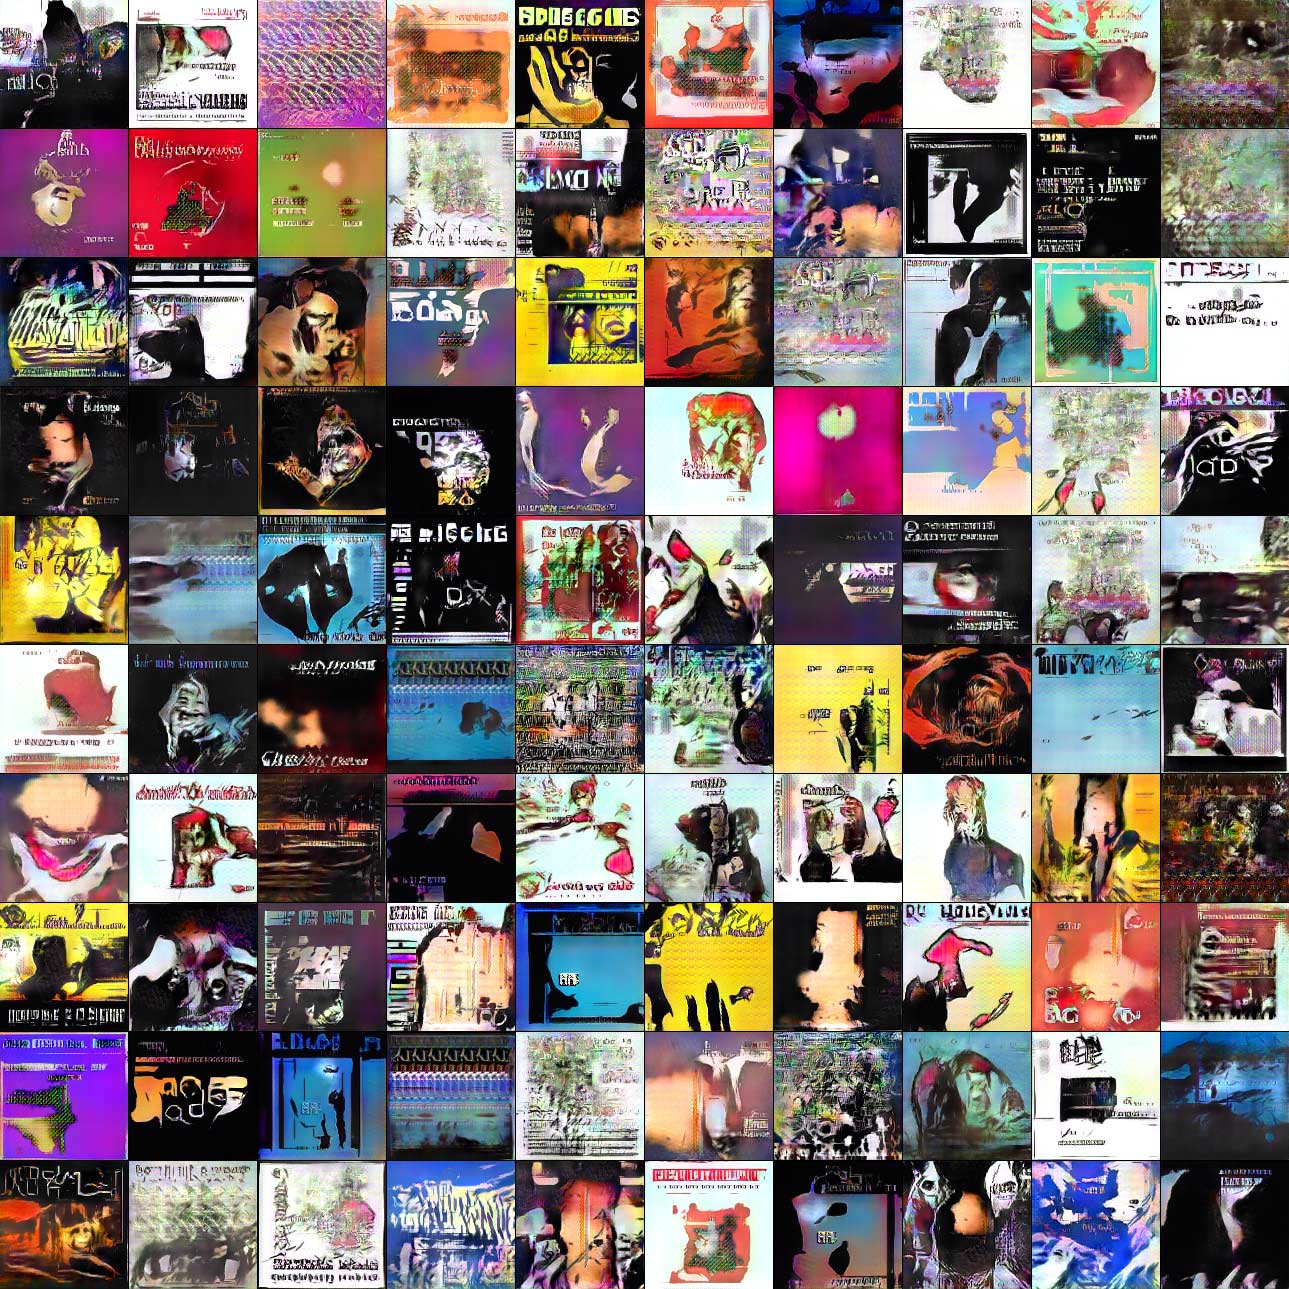 Fictional album covers created by a generative adversarial network